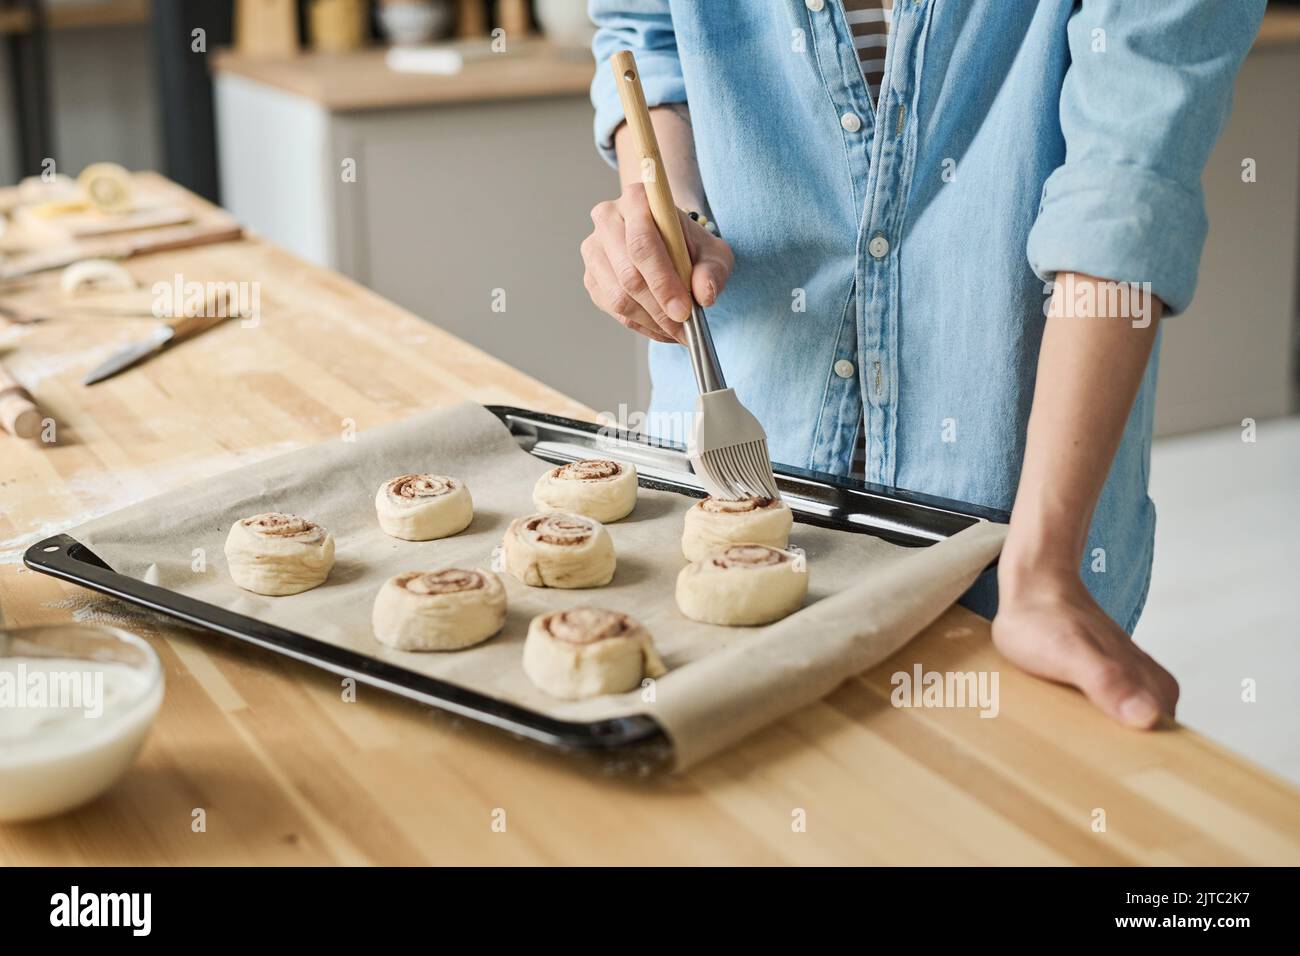 Close-up of young woman using brush to oil buns on tray before baking Stock Photo